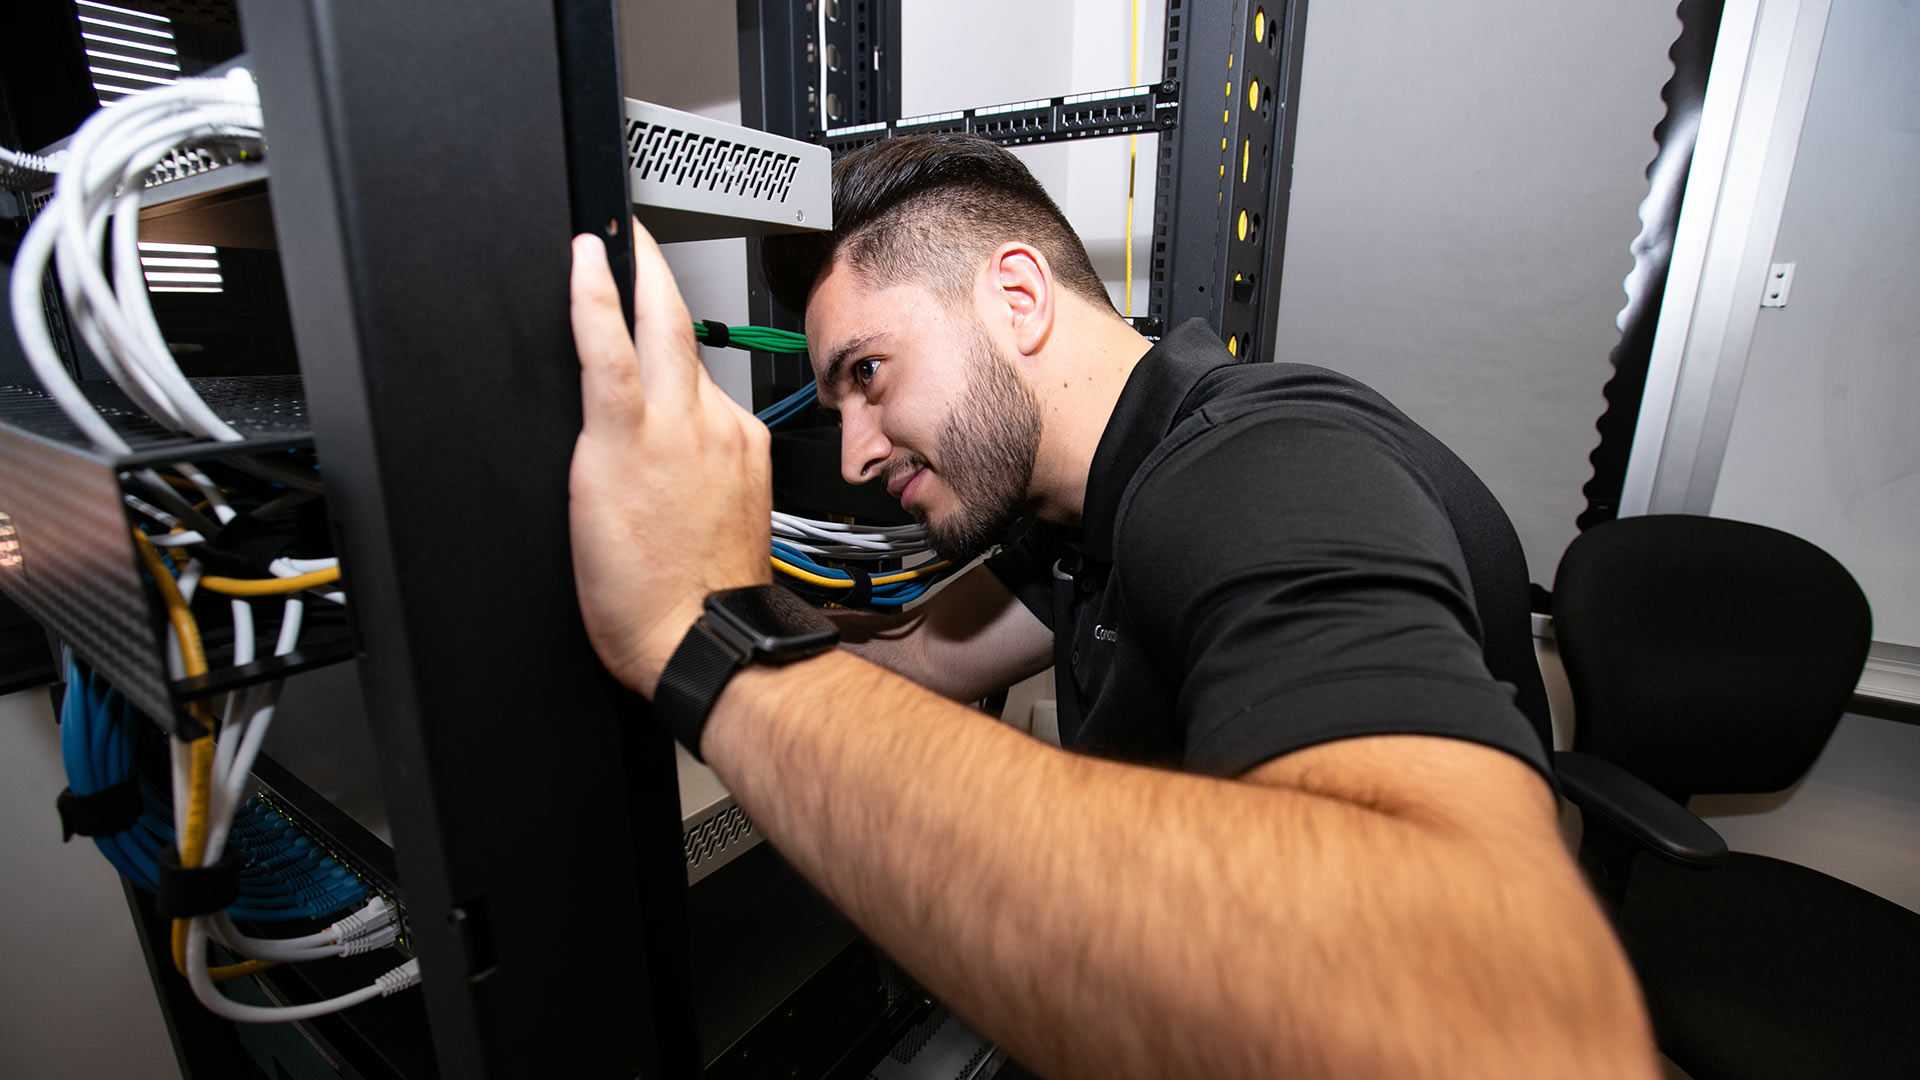 Cybersecurity person working on equipment